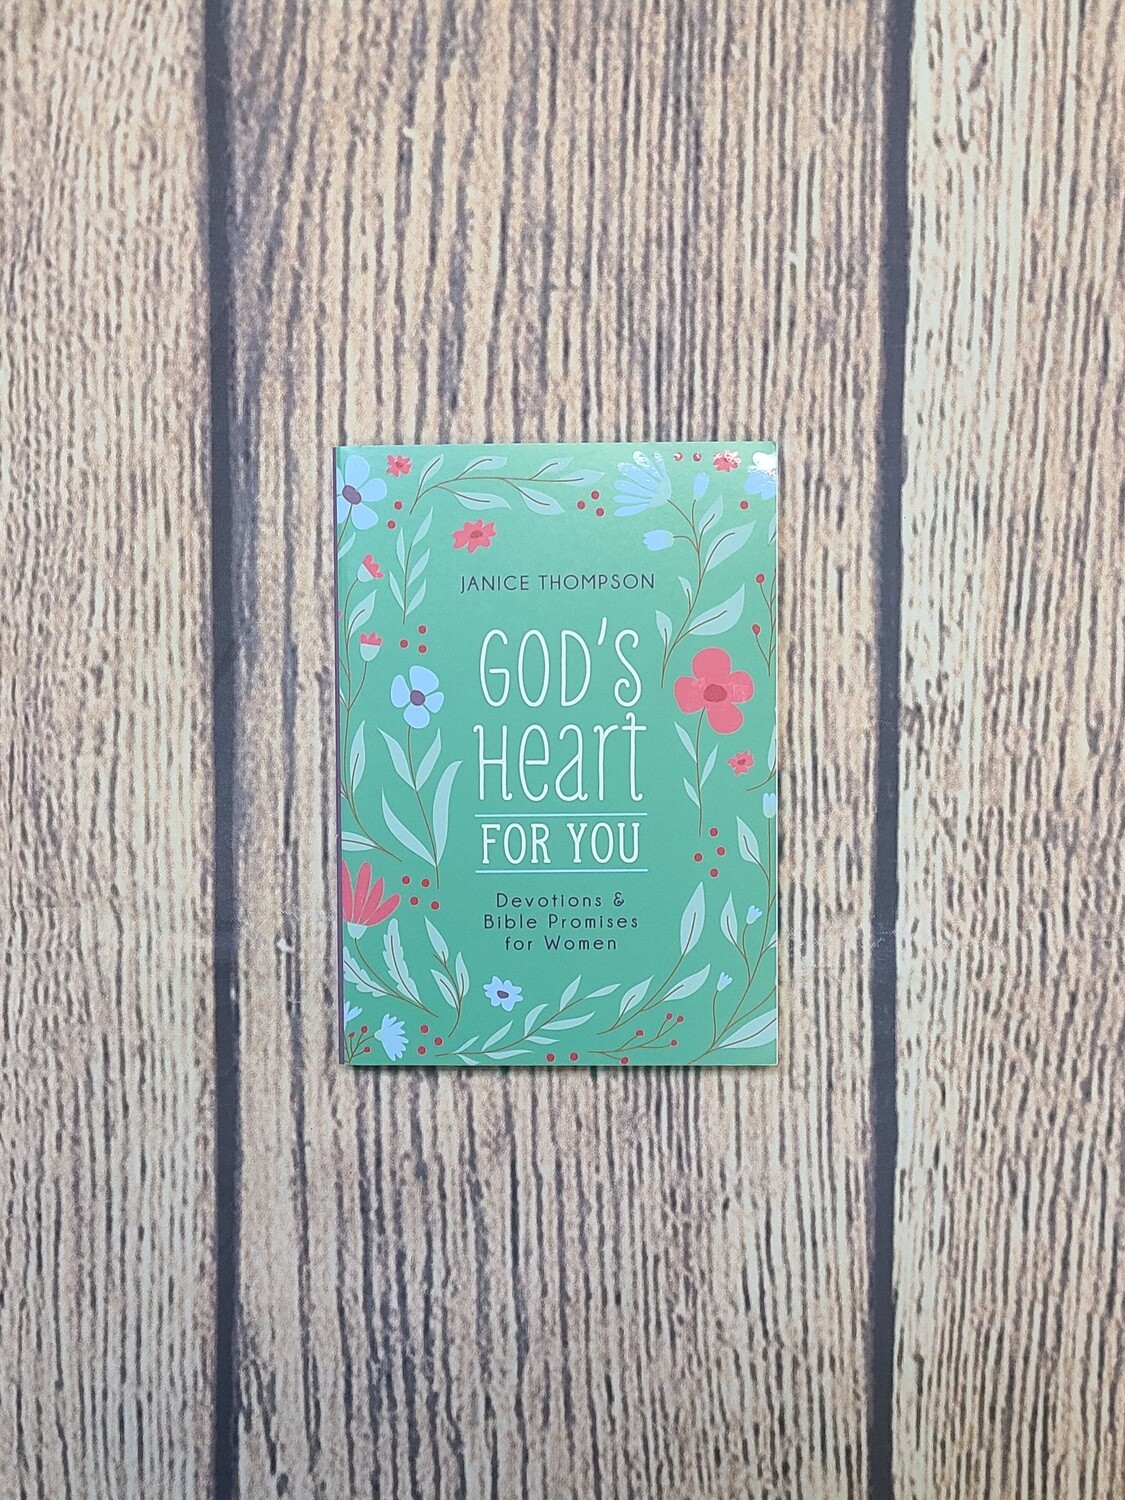 God's Heart for You: Devotions and Bible Promises for Women by Janice Thompson